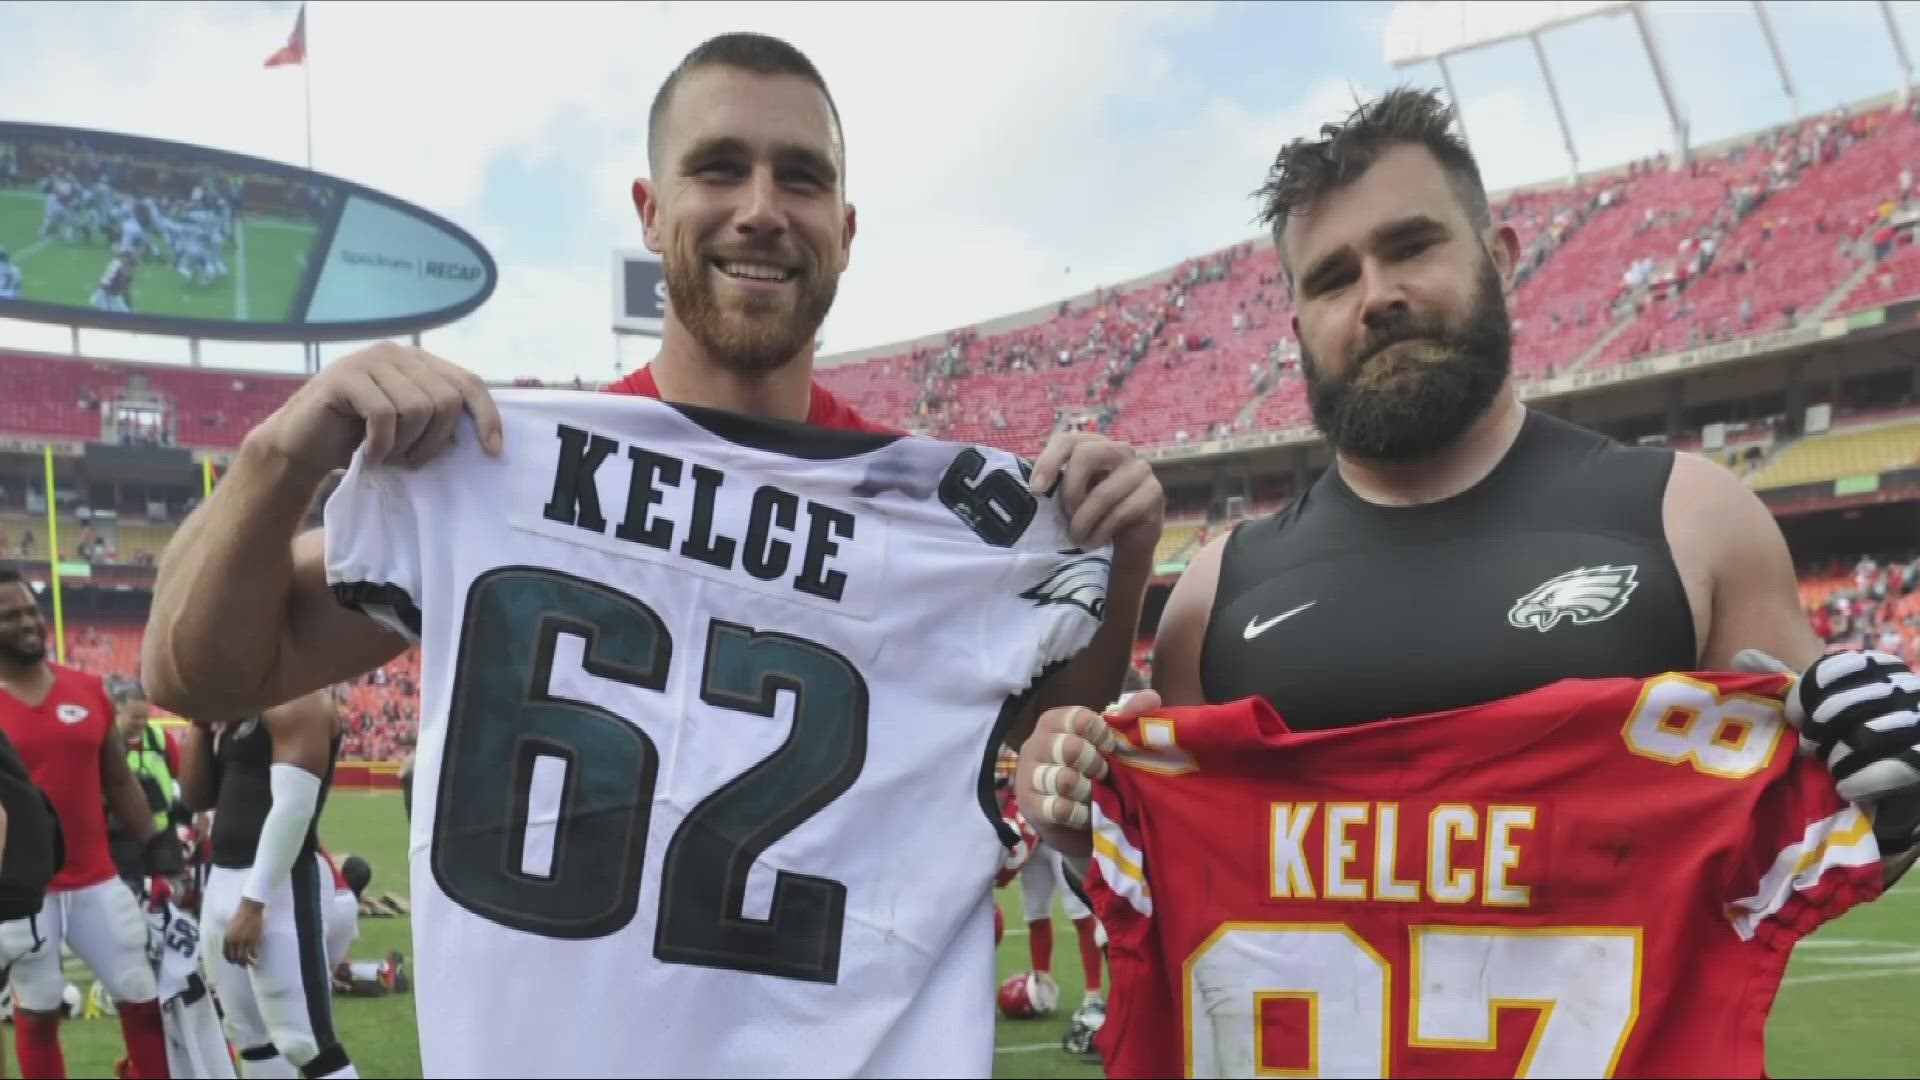 Cleveland Heights will show support for Jason and Travis Kelce as the Pro Bowl brothers face off against each other in Super Bowl LVII.